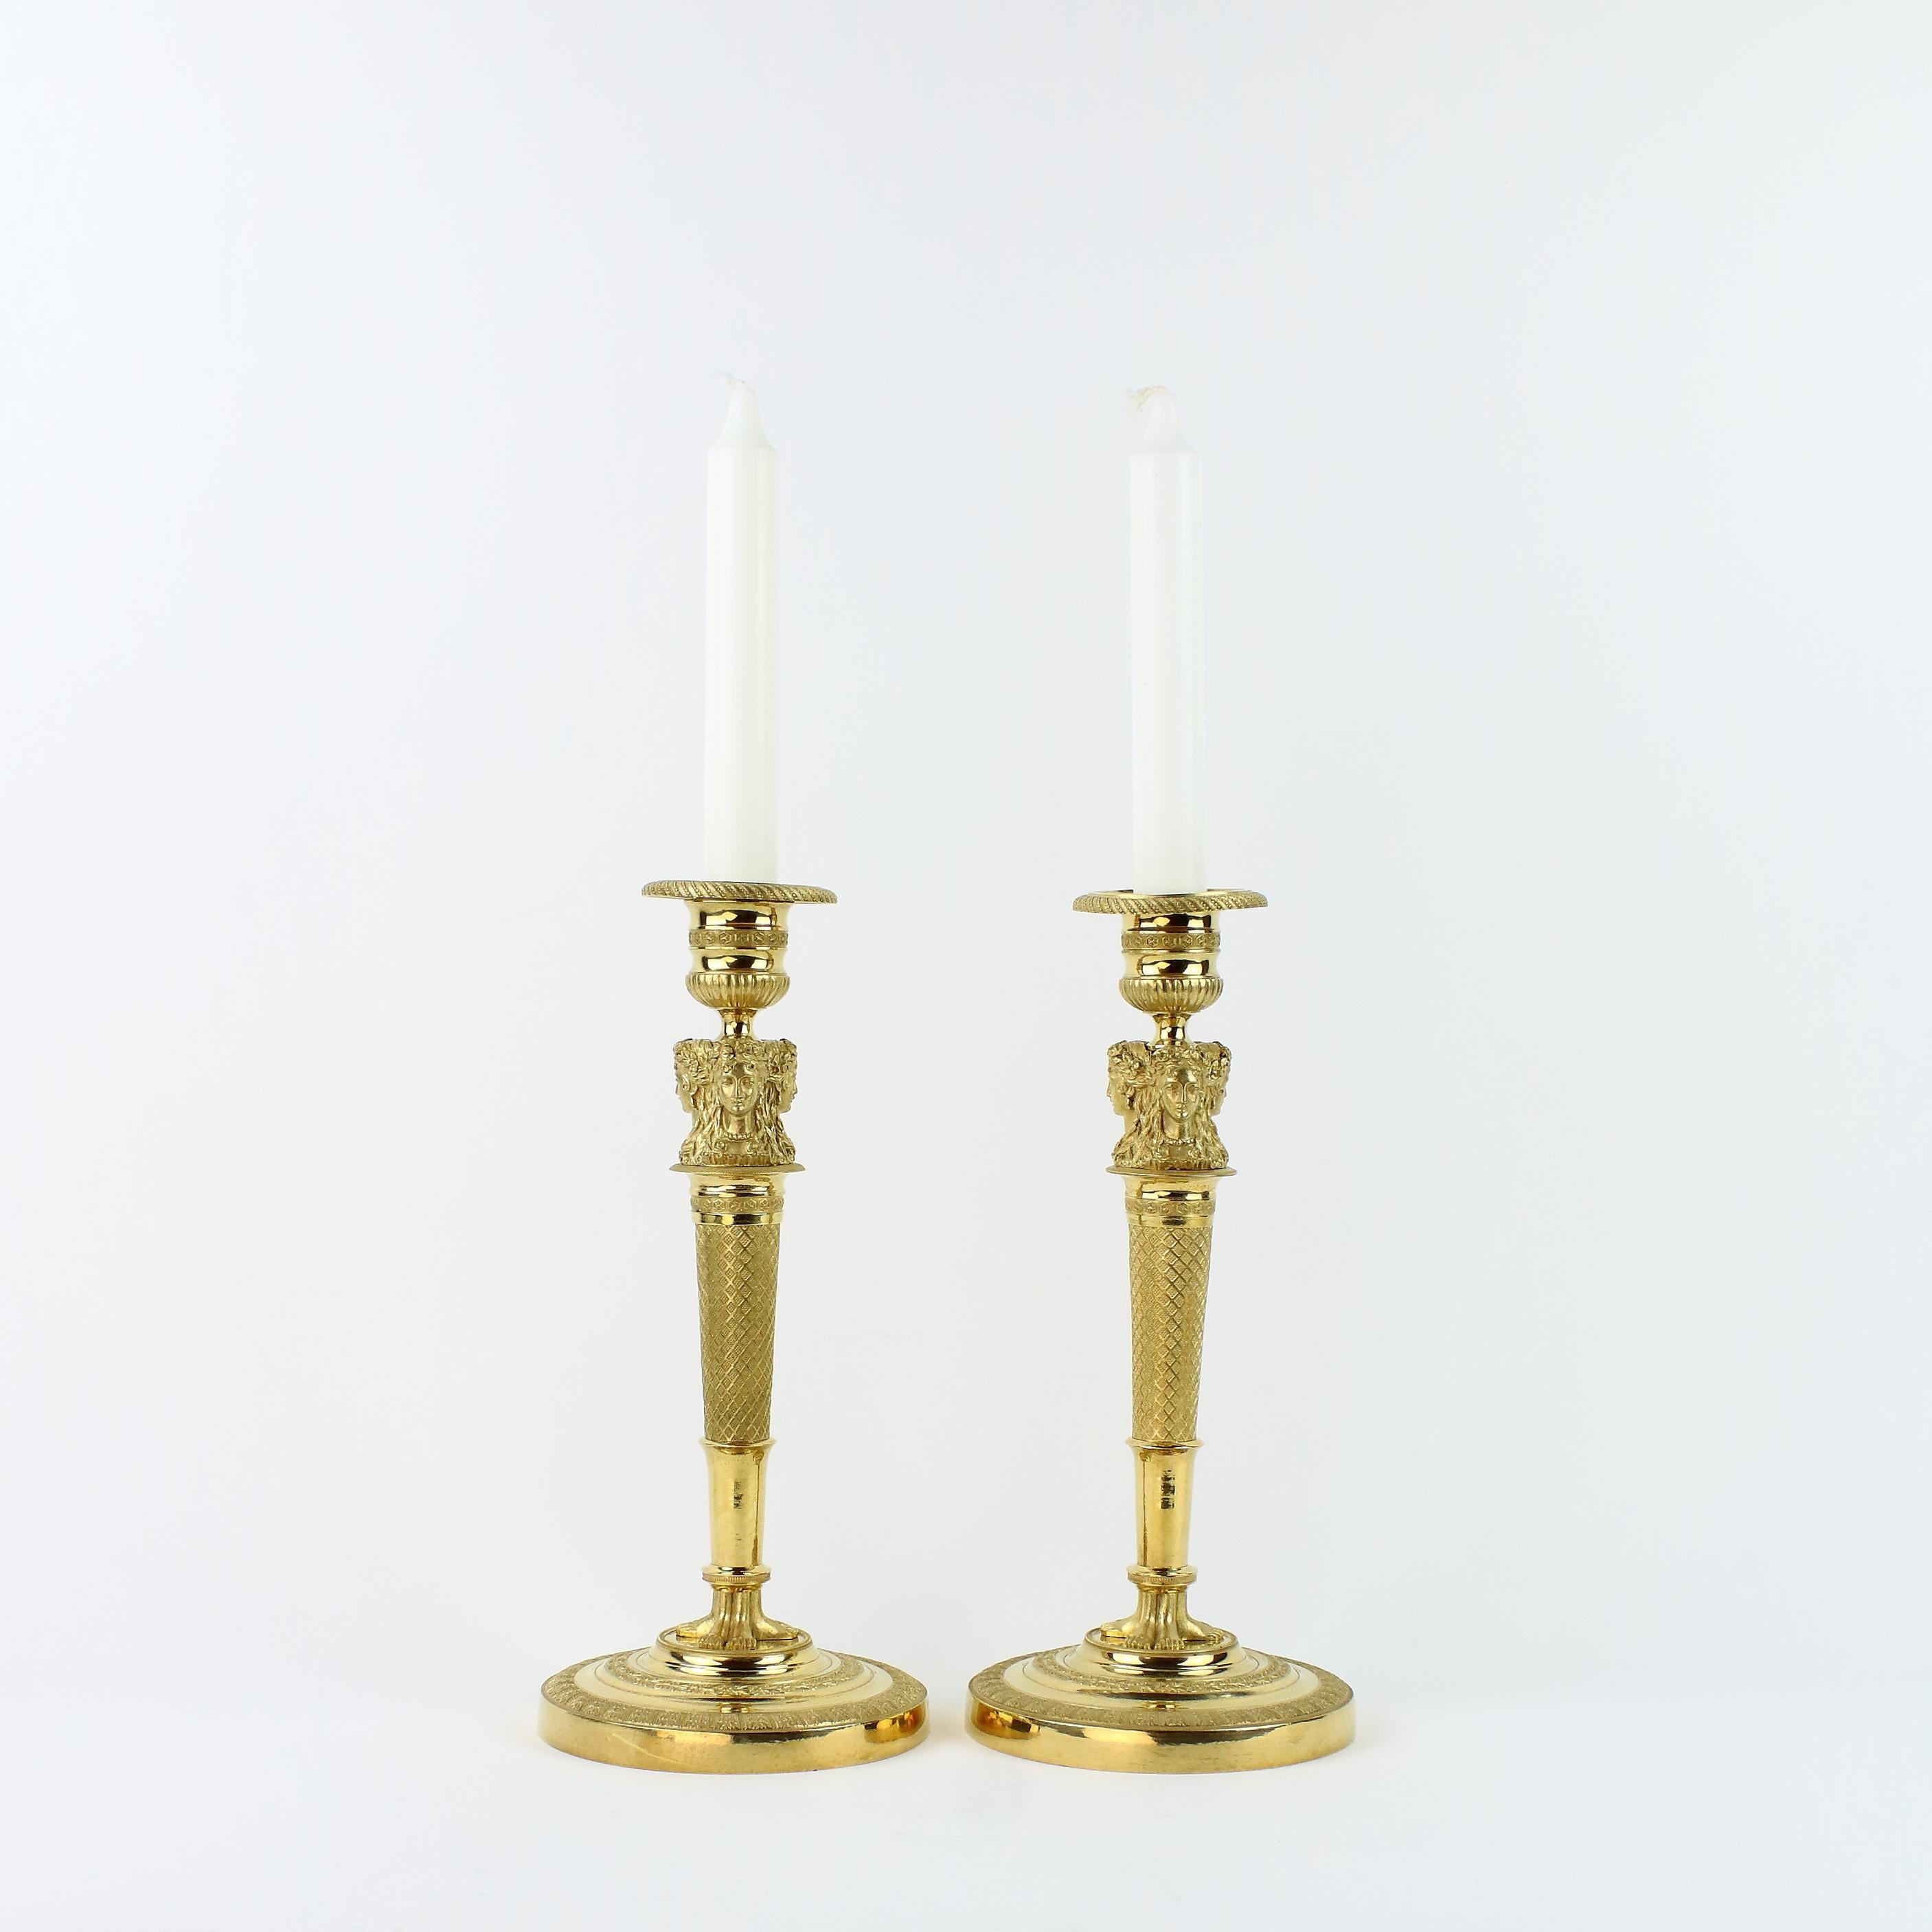 French Early 19th Century Pair of Empire Gilt Bronze Female Caryatids Candlesticks